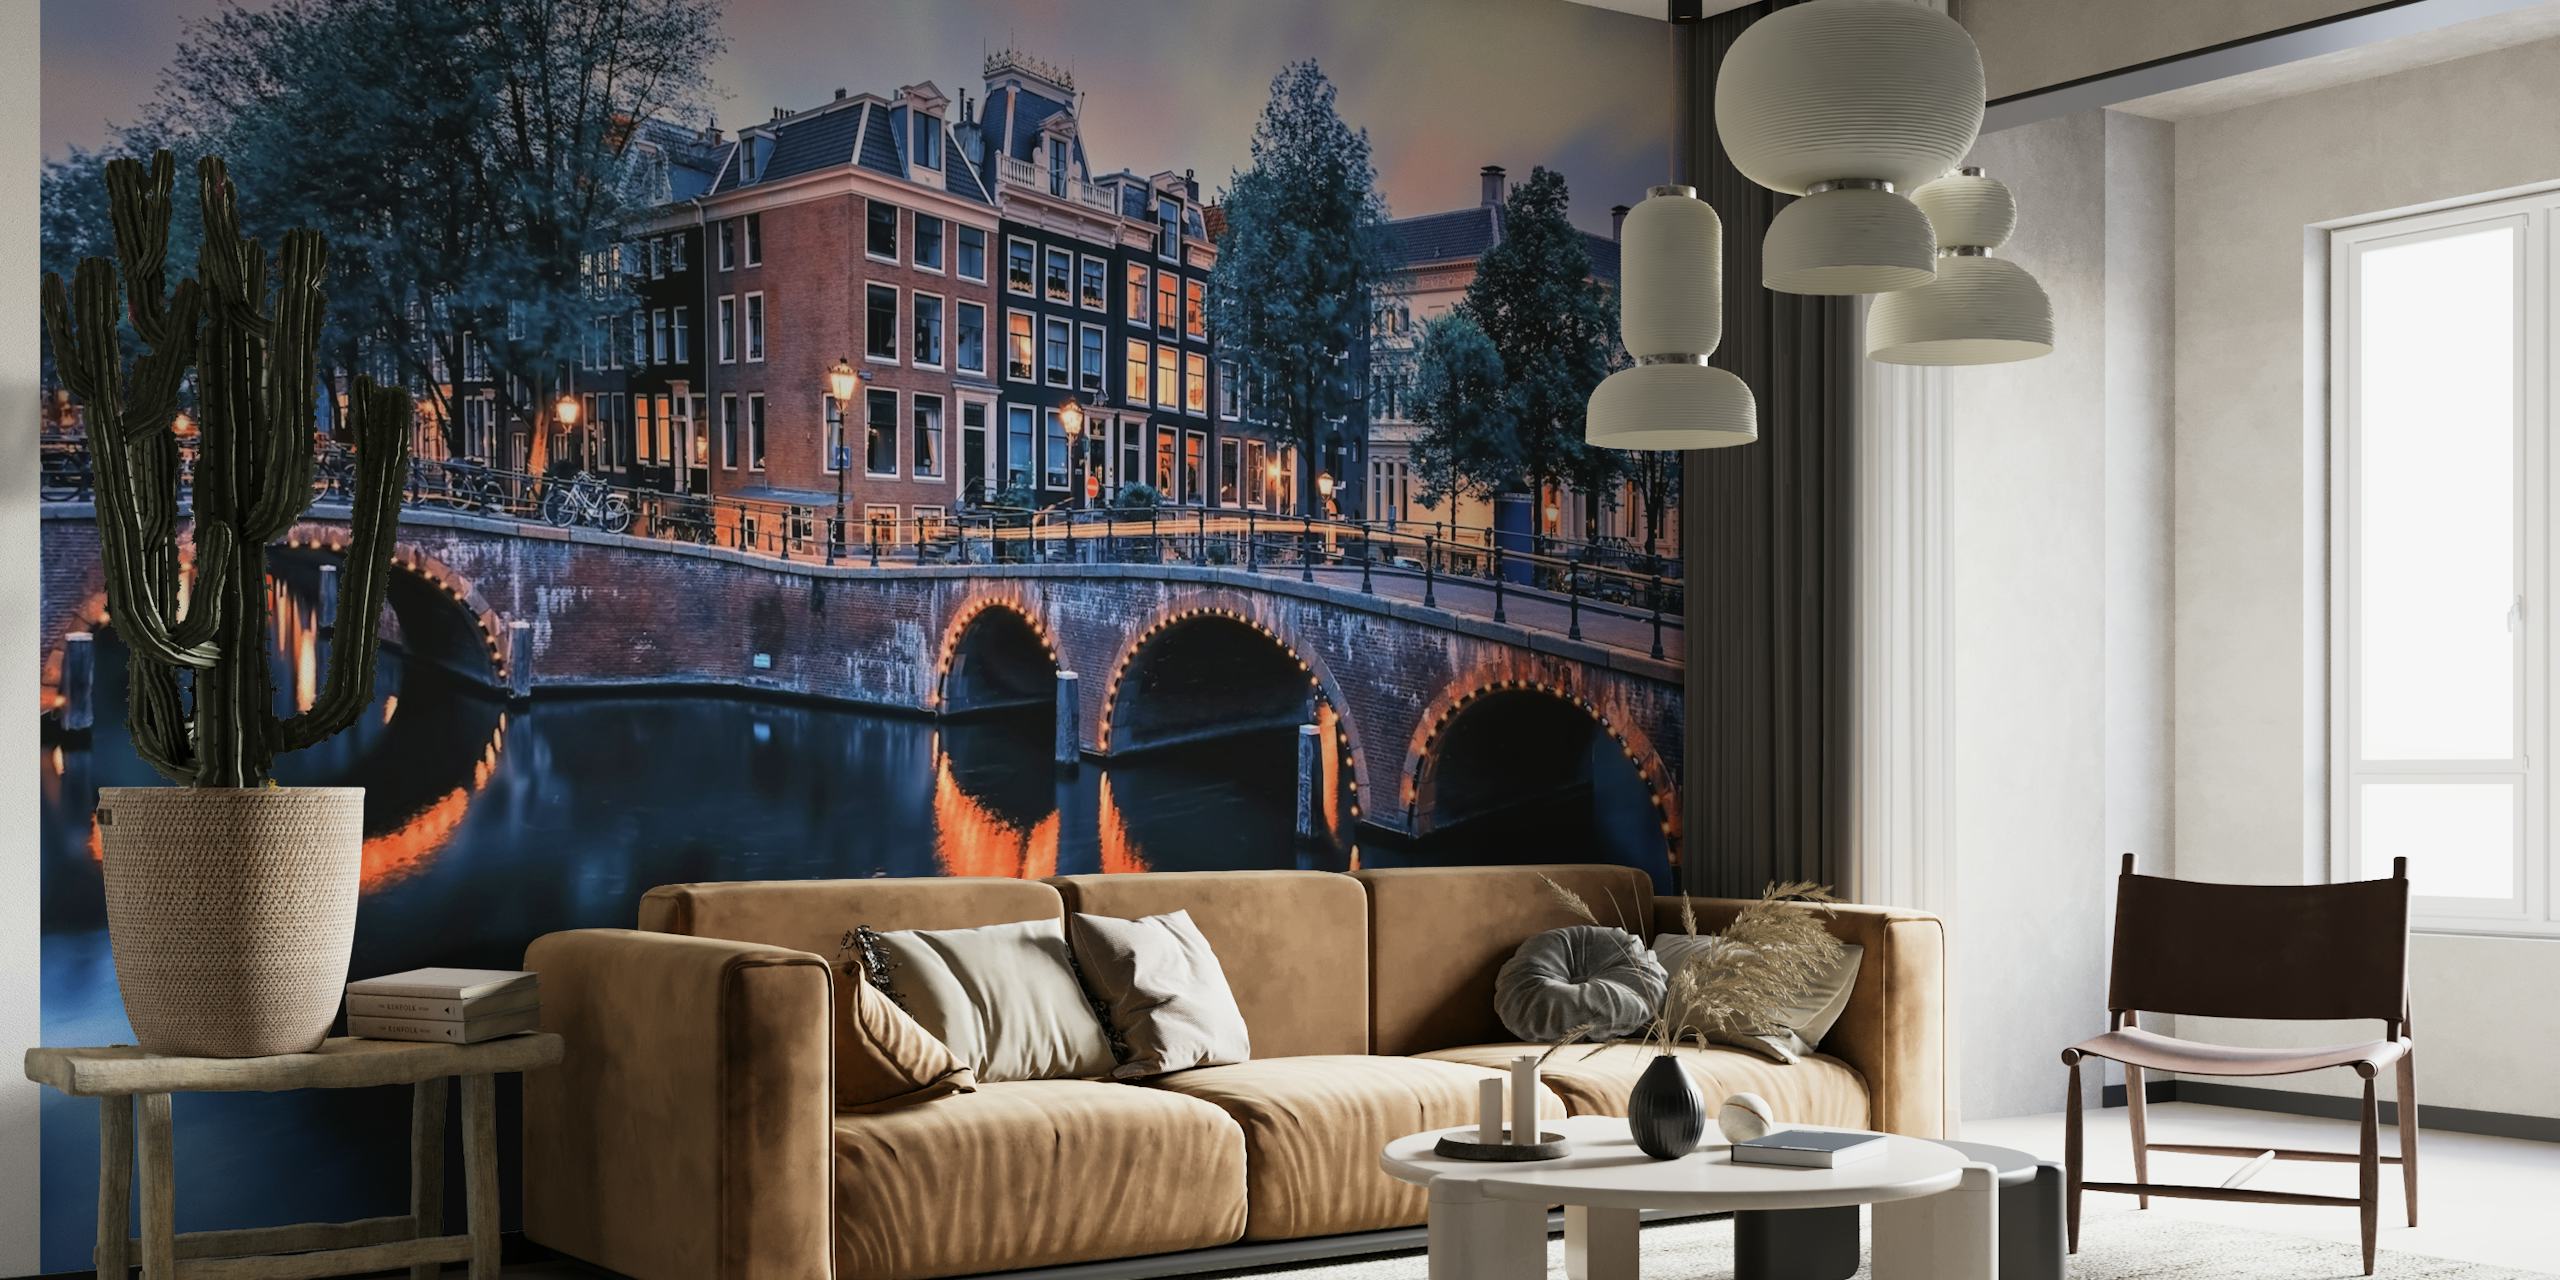 Amsterdam canal houses and bridge at sunset wall mural